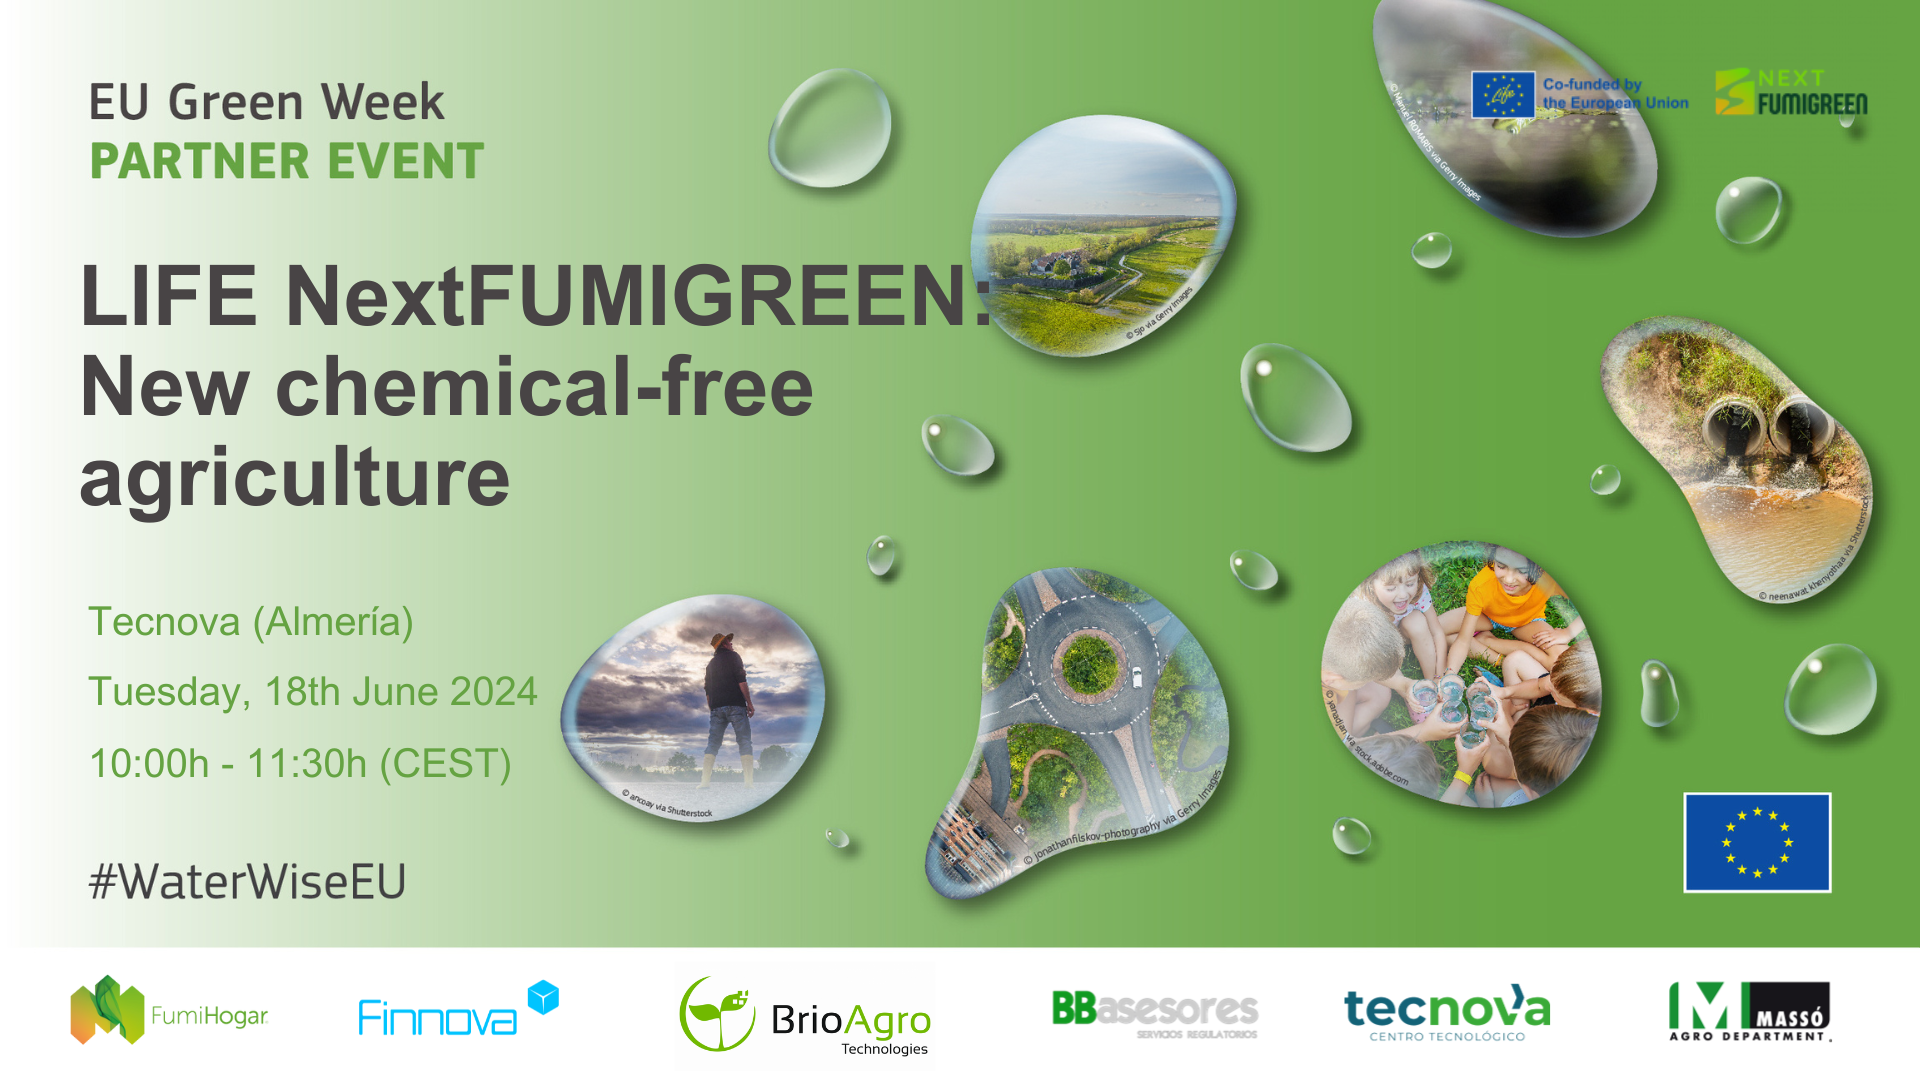 LIFE NextFUMIGREEN prepares for the “New Toxic-Free Agriculture” event at the European Green Week